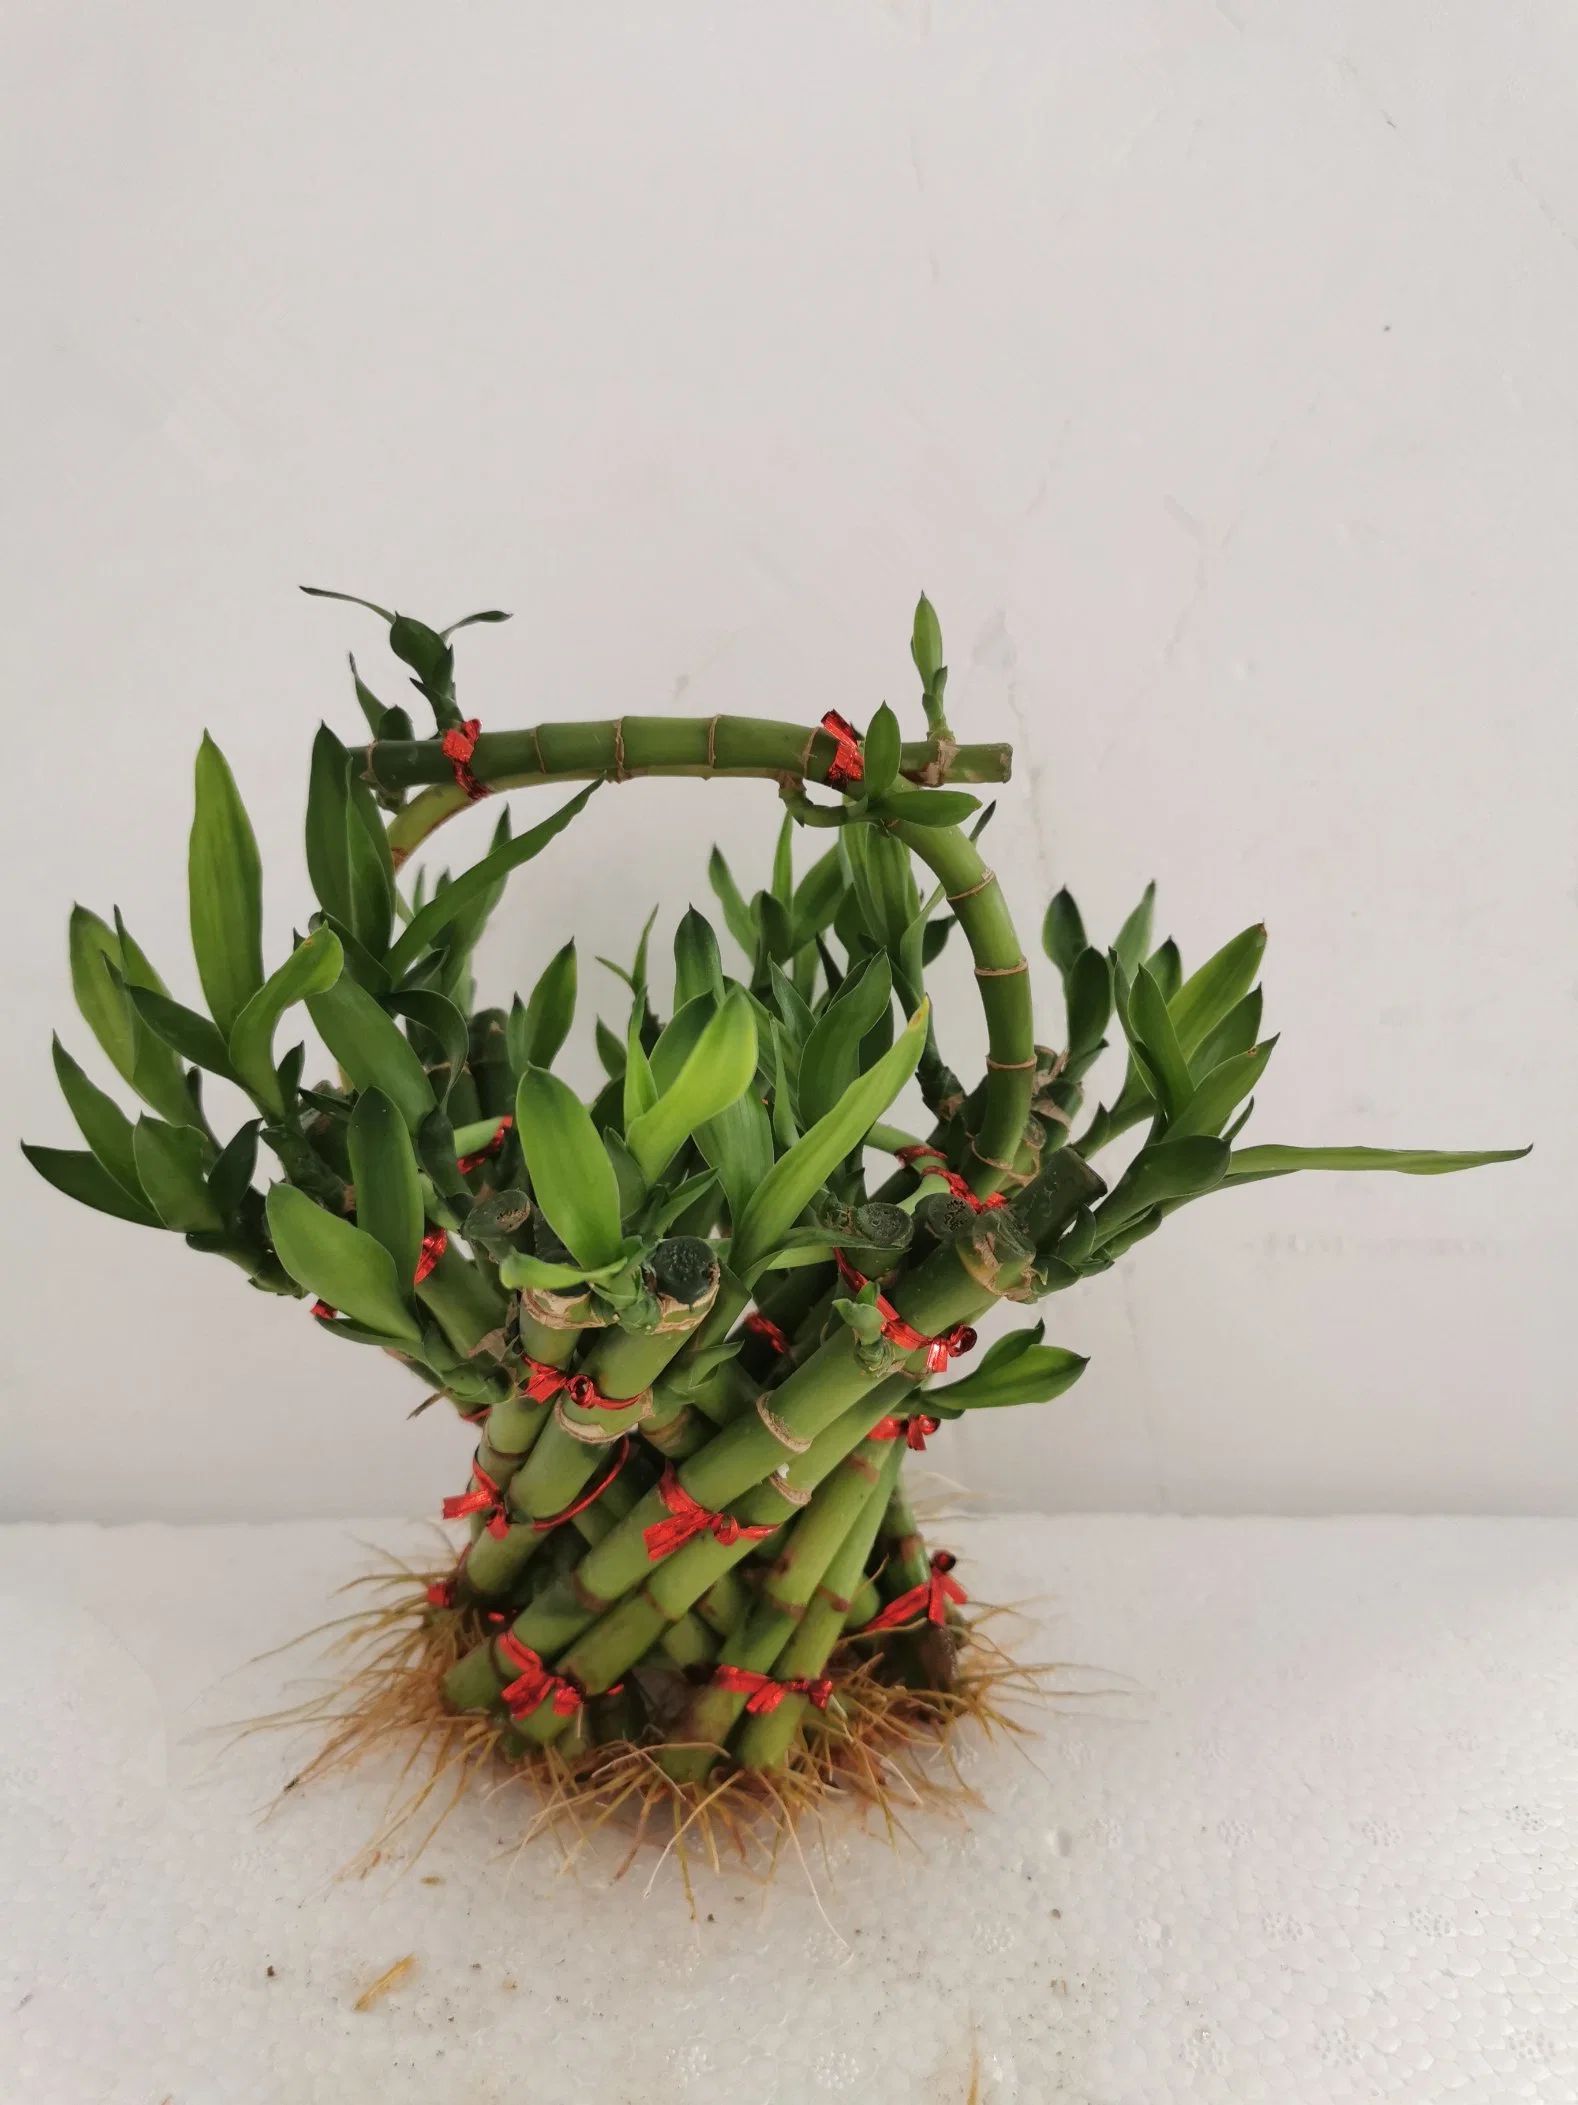 Folwer Basket Lucky Bamboo Plant Brided Bonsai Live Flowers Decoration Wholesale